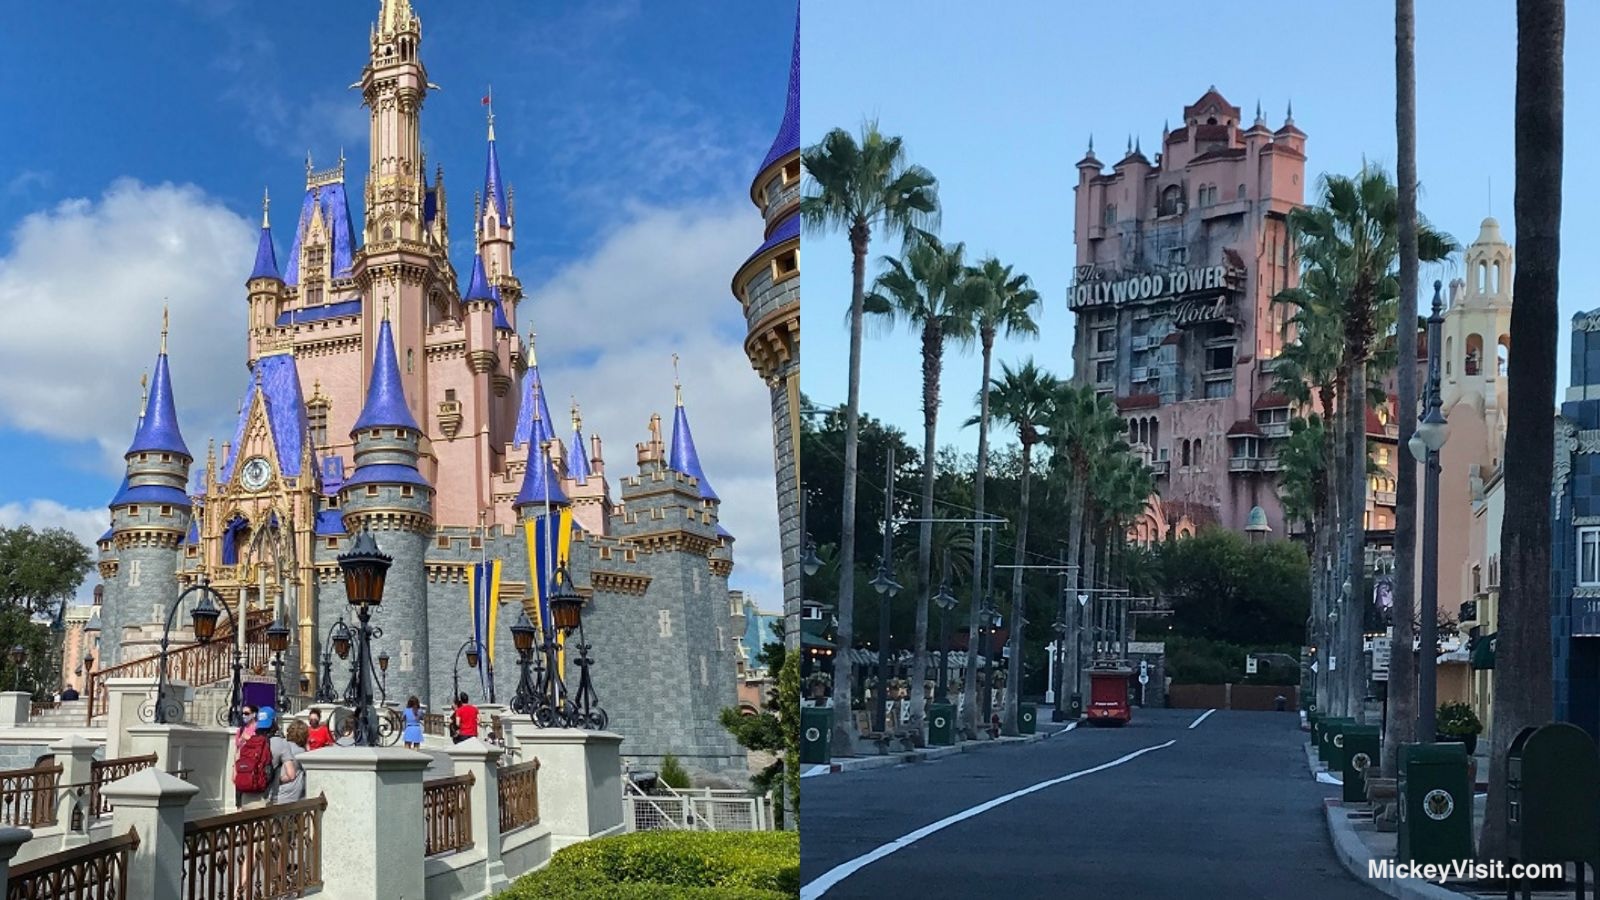 Cinderella Castle and Tower of Terror side by side